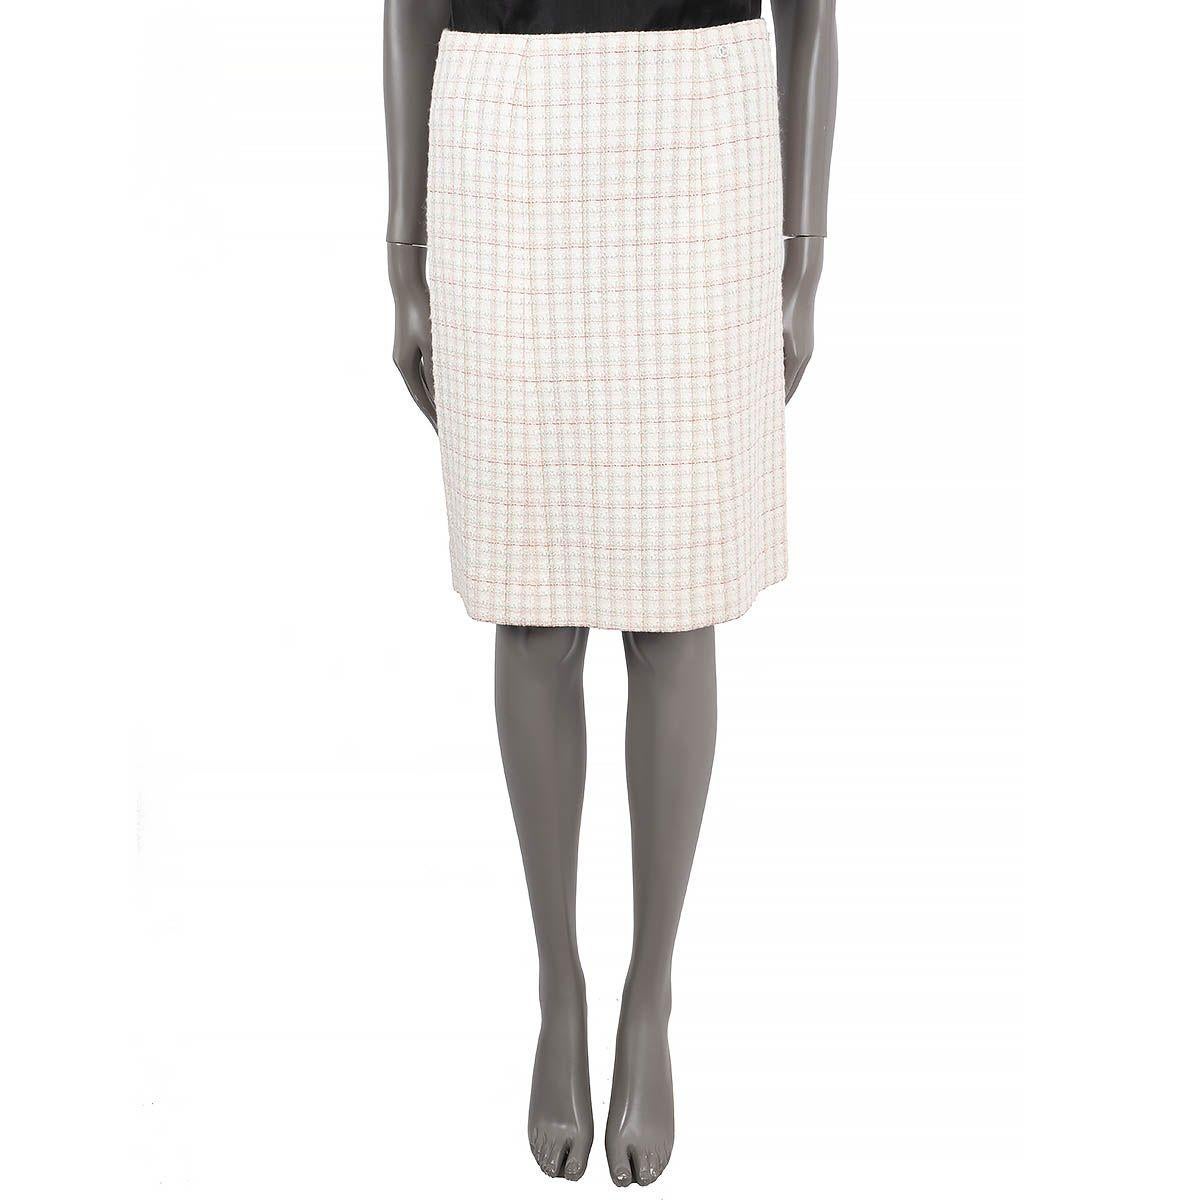 100% authentic Chanel straight tweed skirt in ivory, pink, red and mint green wool (36%), nylon (34%), viscose (16%) and cotton (14%). Closes with one hook and a invisible zipper on the back. Lined in ivory silk (95%) and spandex (5%). Has been worn